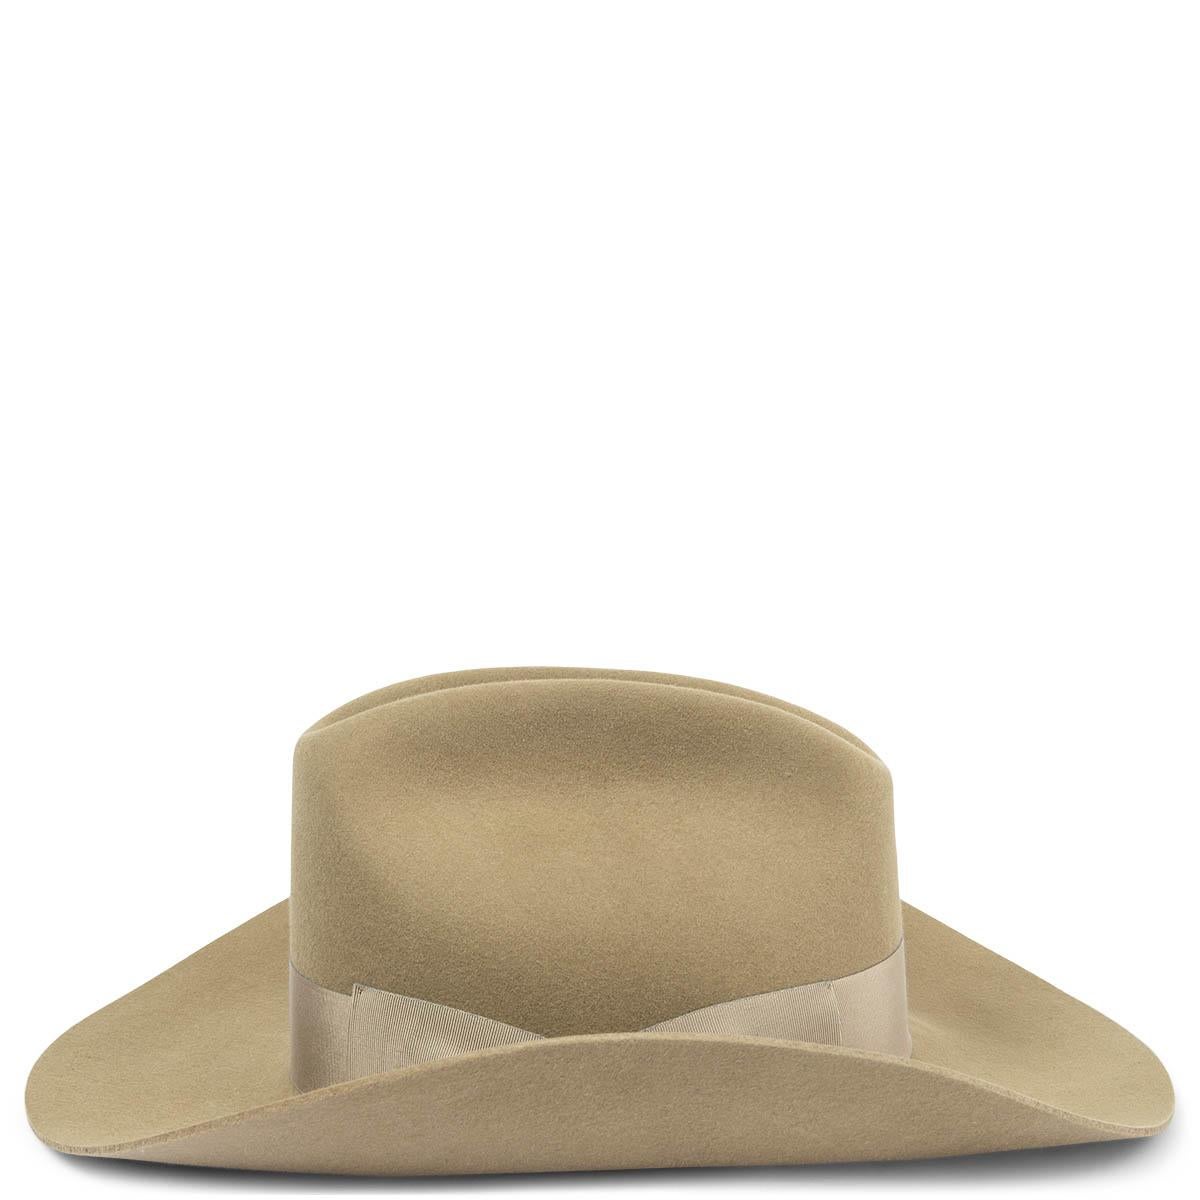 100% authentic Gucci wide brim double G Fedora hat in celadon green rabbit felt (100%) featuring tonal grosgrain band in viscose (59%), cotton (40%) and polyester (1%). Has been worn and is in excellent condition. 

Measurements
Tag